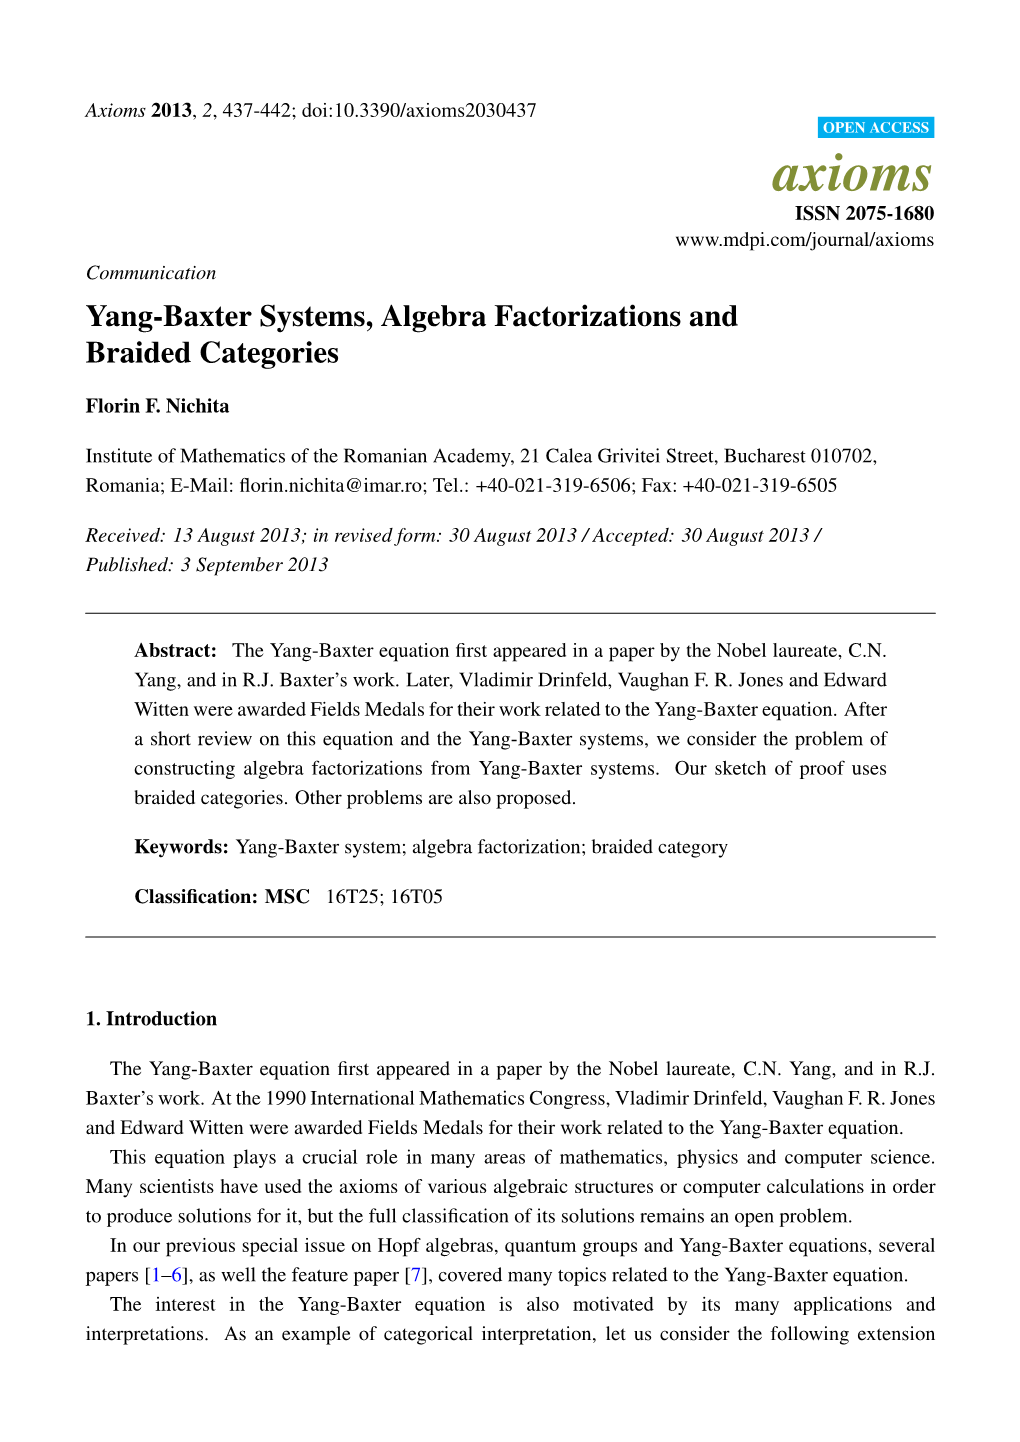 Yang-Baxter Systems, Algebra Factorizations and Braided Categories